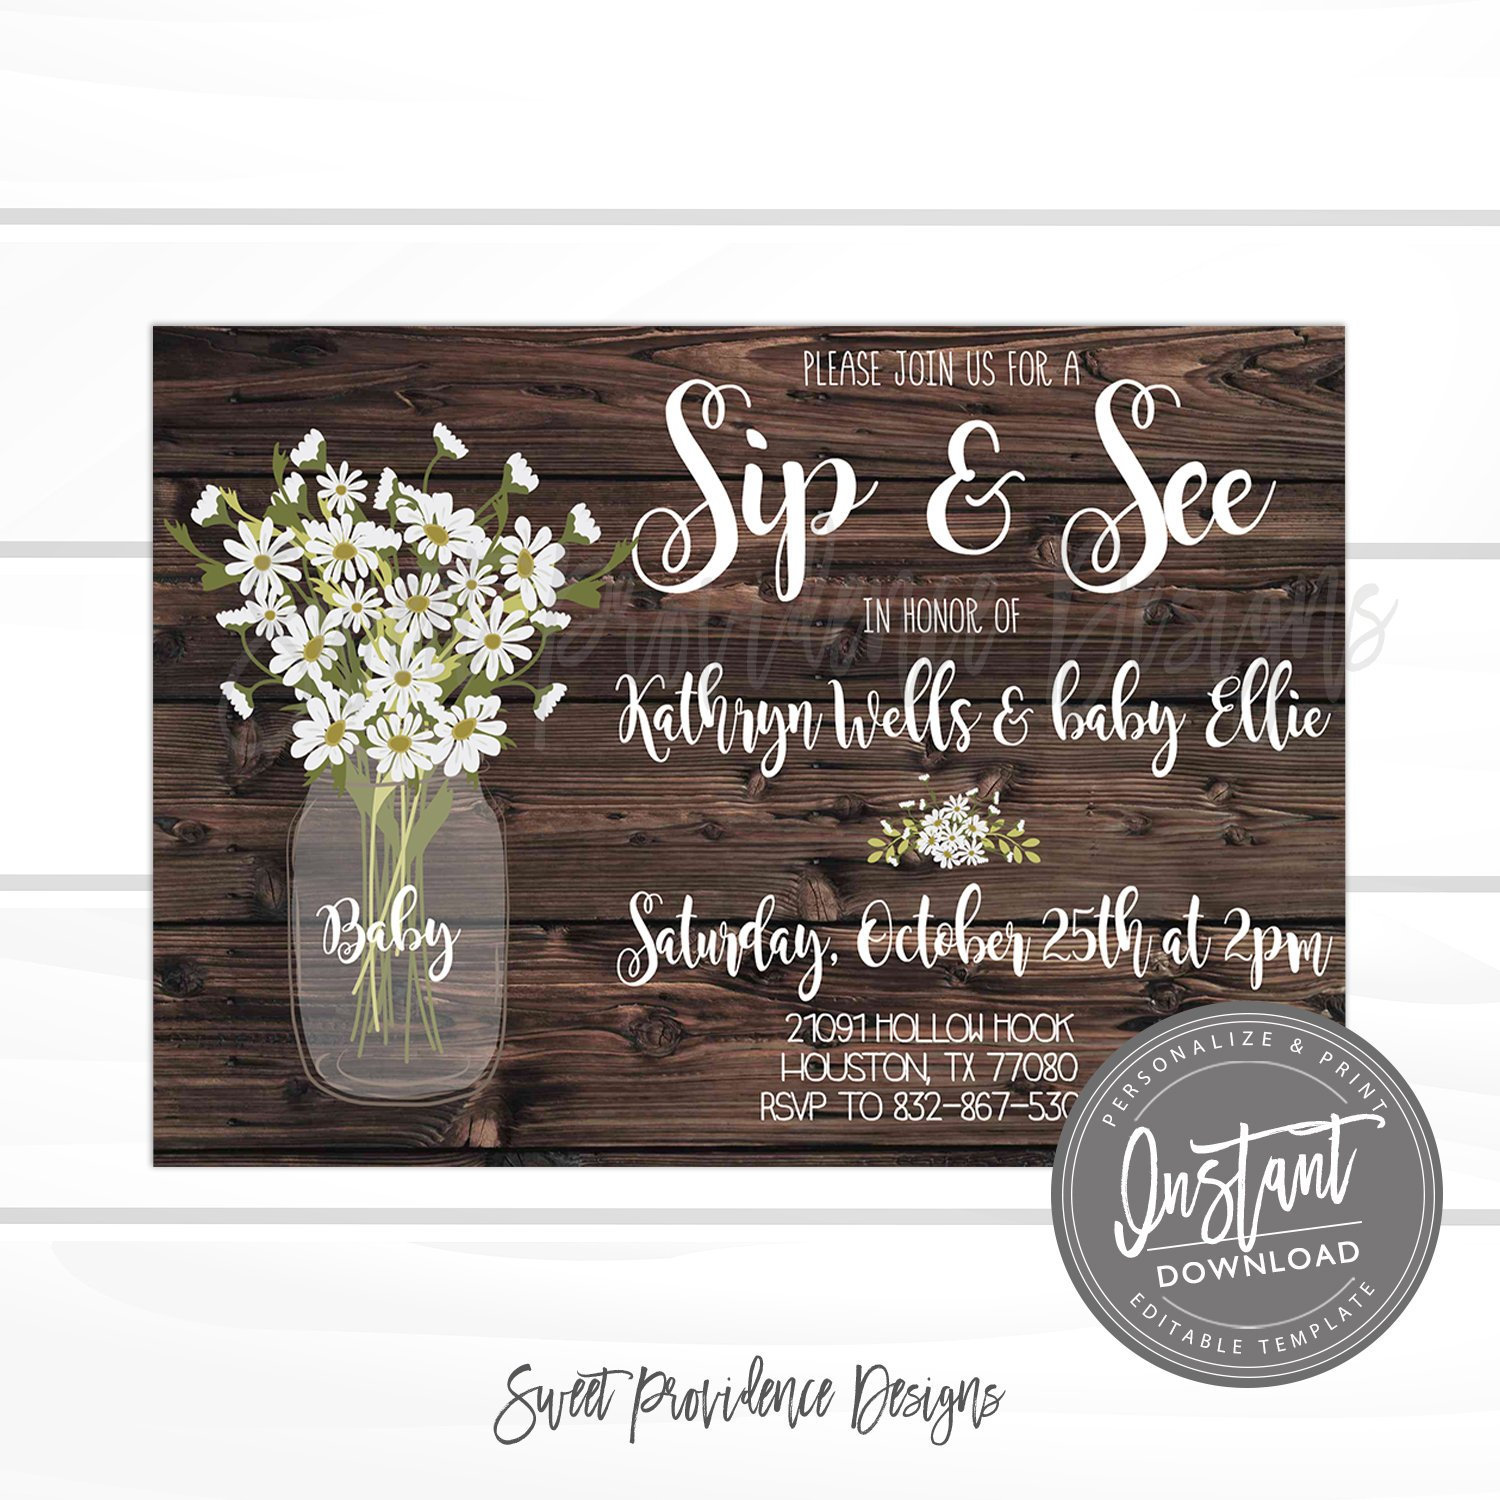 Sip and See Invitation Design 2